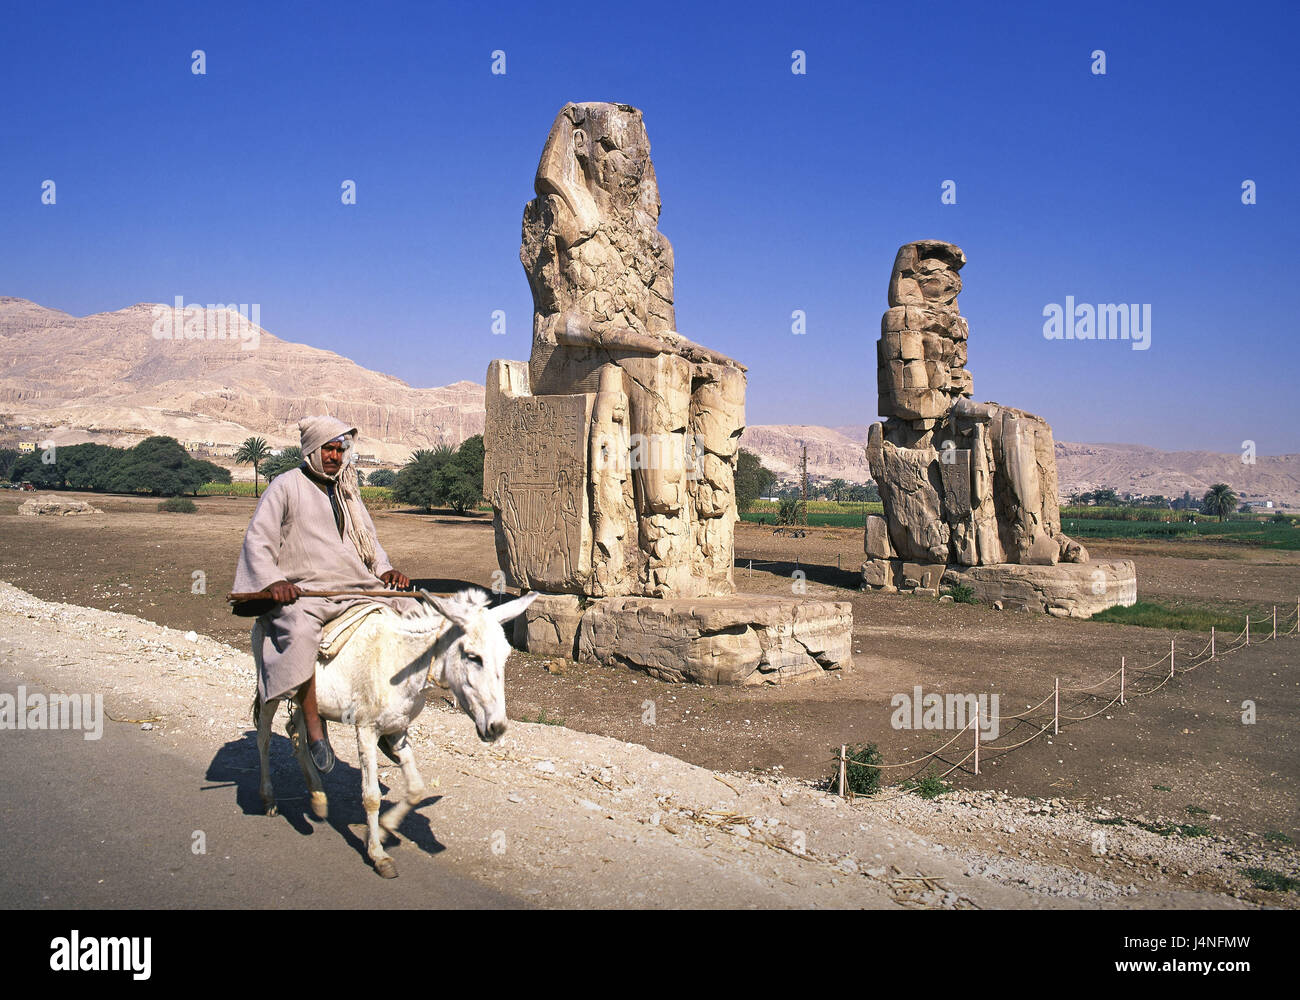 Egypt, Thebes, Memnon colossi, bleeds, Luxor, statues, characters, Memnon, giant statues, Memnon colossi, incredibly, imposingly, seat characters, gigantic characters, man, local, ride, mule, donkey, place of interest, art, culture, historically, story, travel, Stock Photo